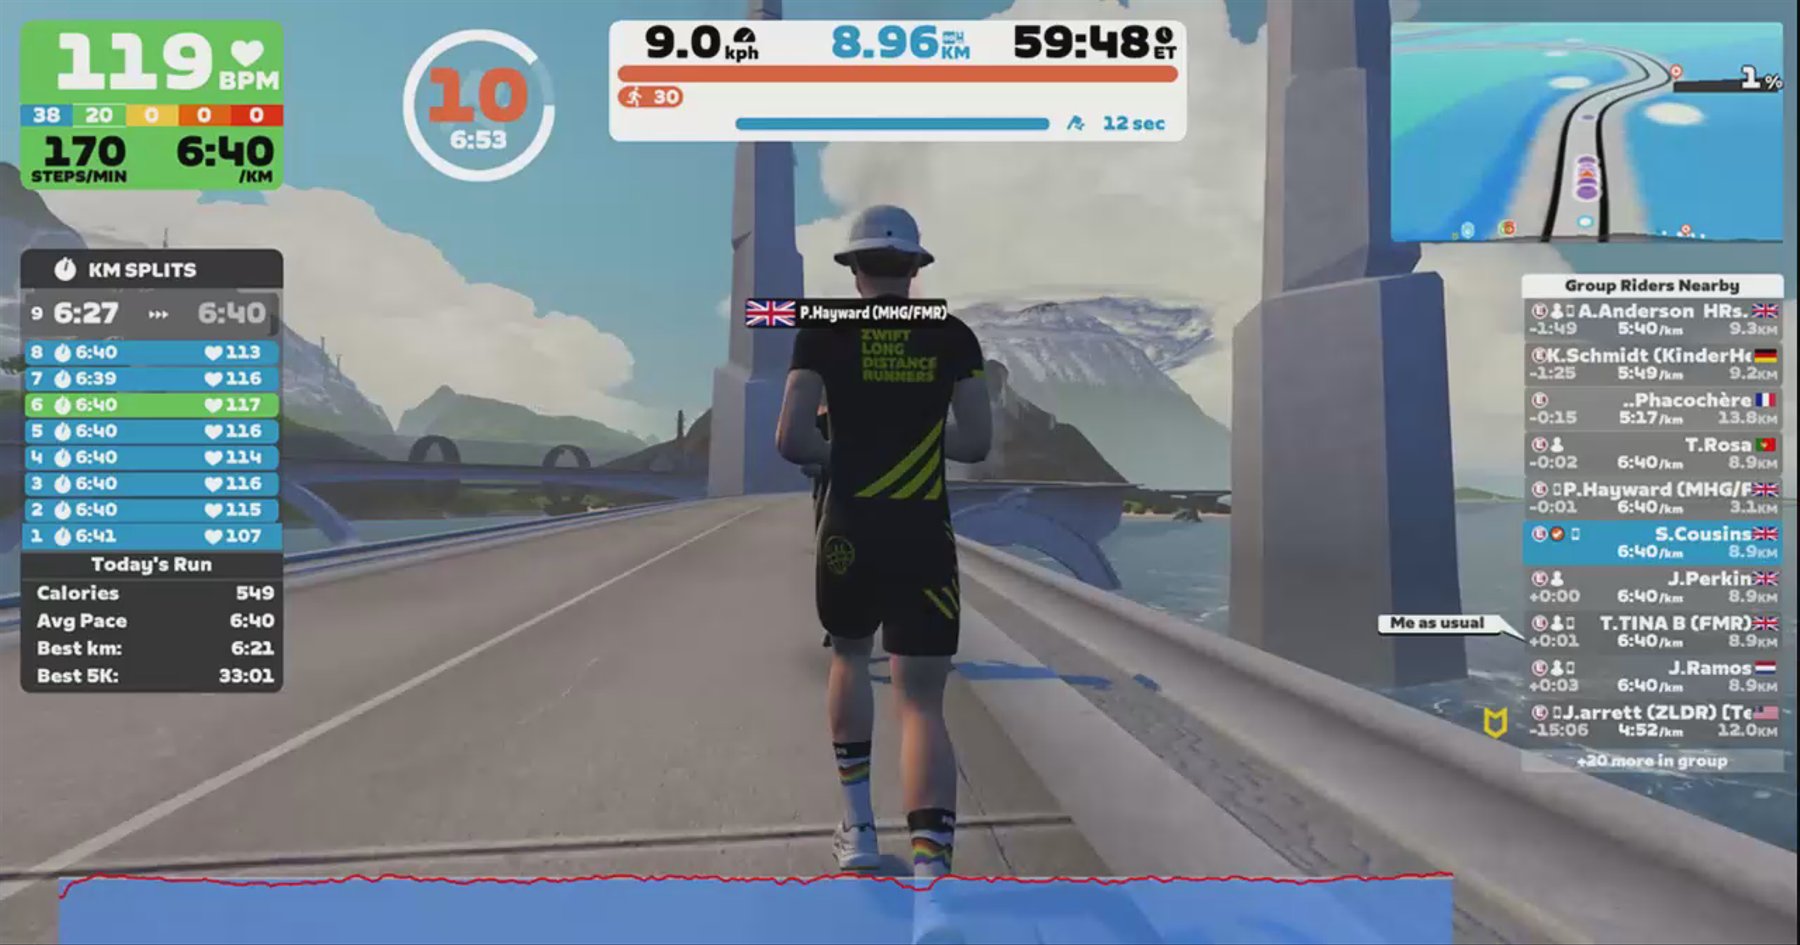 Zwift - Group Run: ZLDR Recovery Hour (E) on 11.1 Ocean Blvd in Watopia